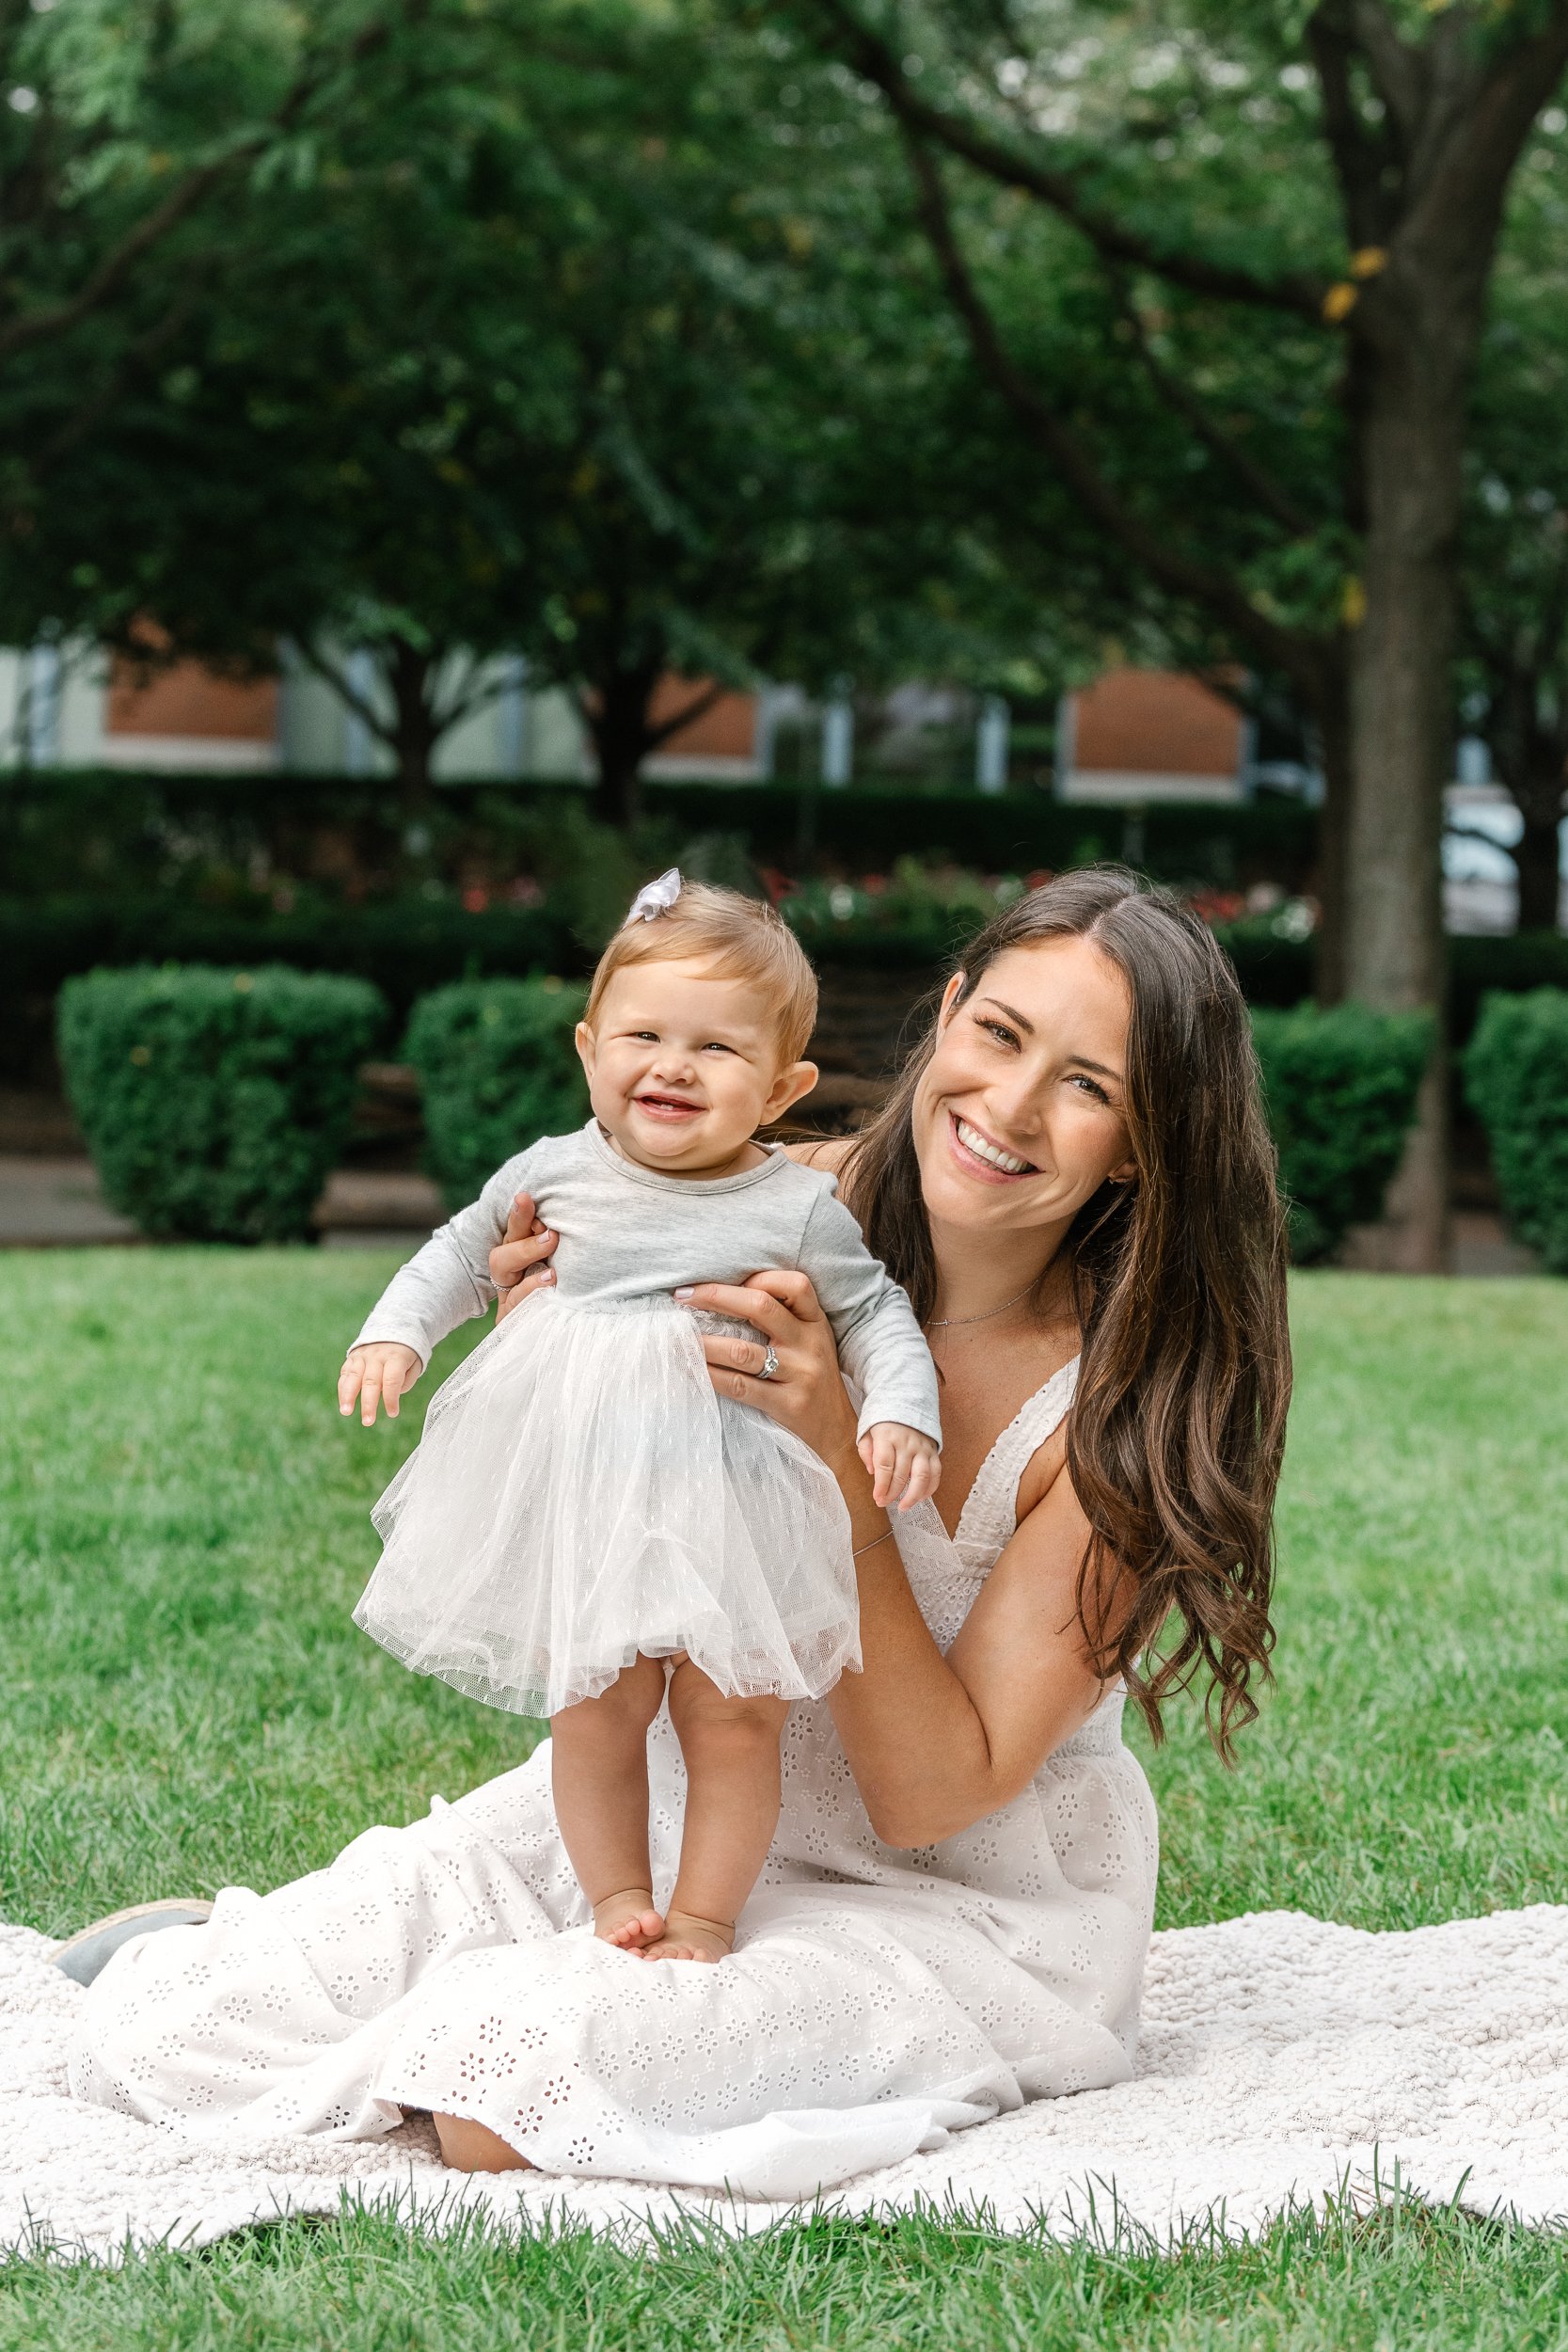  Nicole Hawkins captures a baby girl with a big smile standing on her mommy's lap in Hoboken. eyelet white dress mother and baby picnic blanket #nicolehawkinsphotography #newjerseyphotographers #familyphotographer #6monthportraits #NJfamilyphotos 